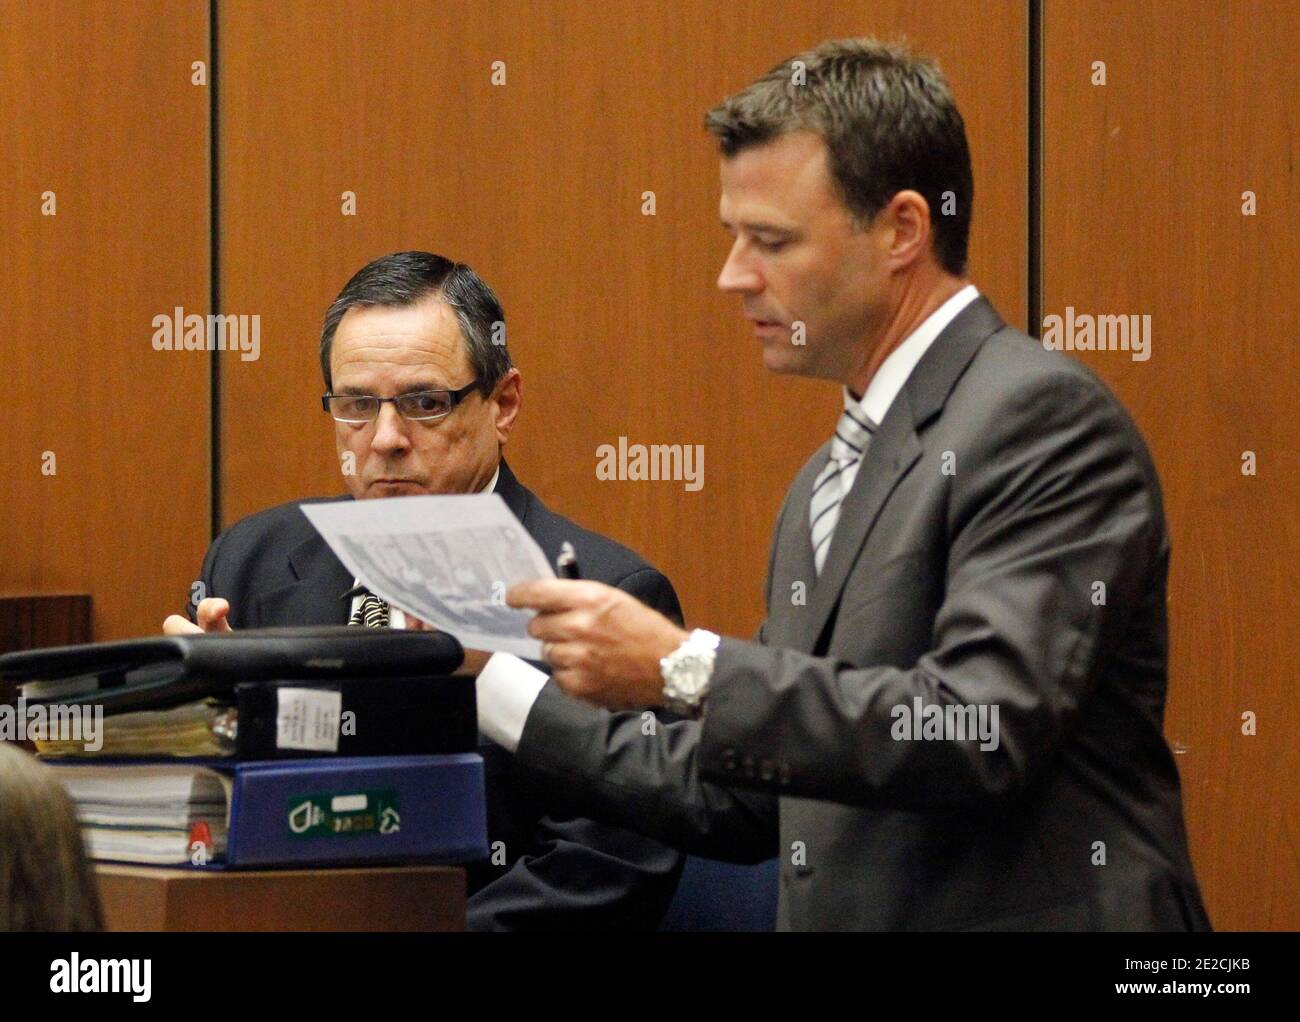 Deputy District Attorney David Walgren (R) questions LAPD Detective Scott Smith during Dr.Conrad Murray's trial in the death of pop star Michael Jackson in Los Angeles on October 07, 2011. Photo by Mario Anzuoni/Pool/ABACAPRESS.COM Stock Photo